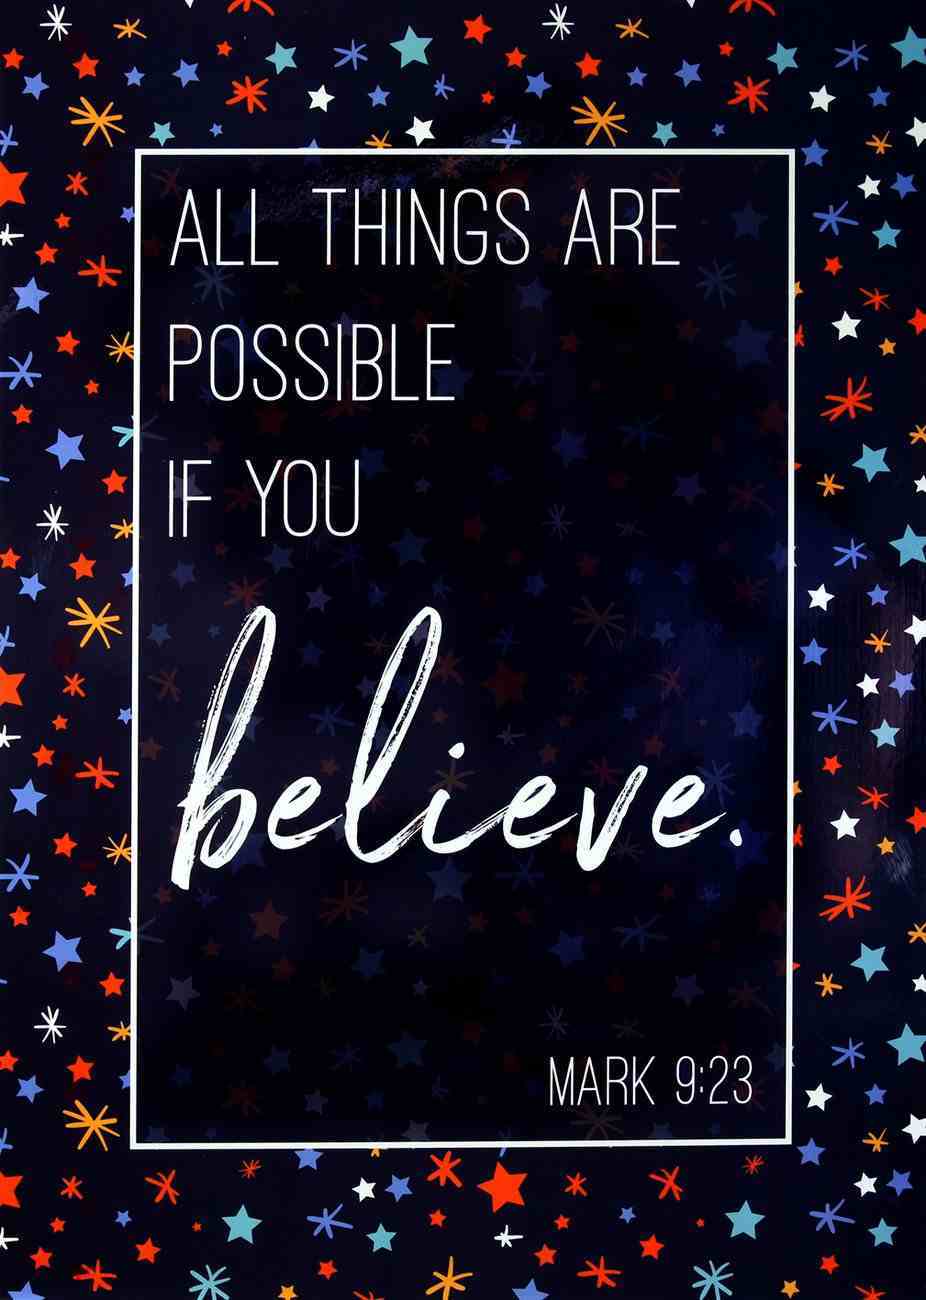 Poster Large: All Things Are Possible If You Believe, Mark 9:23 Poster